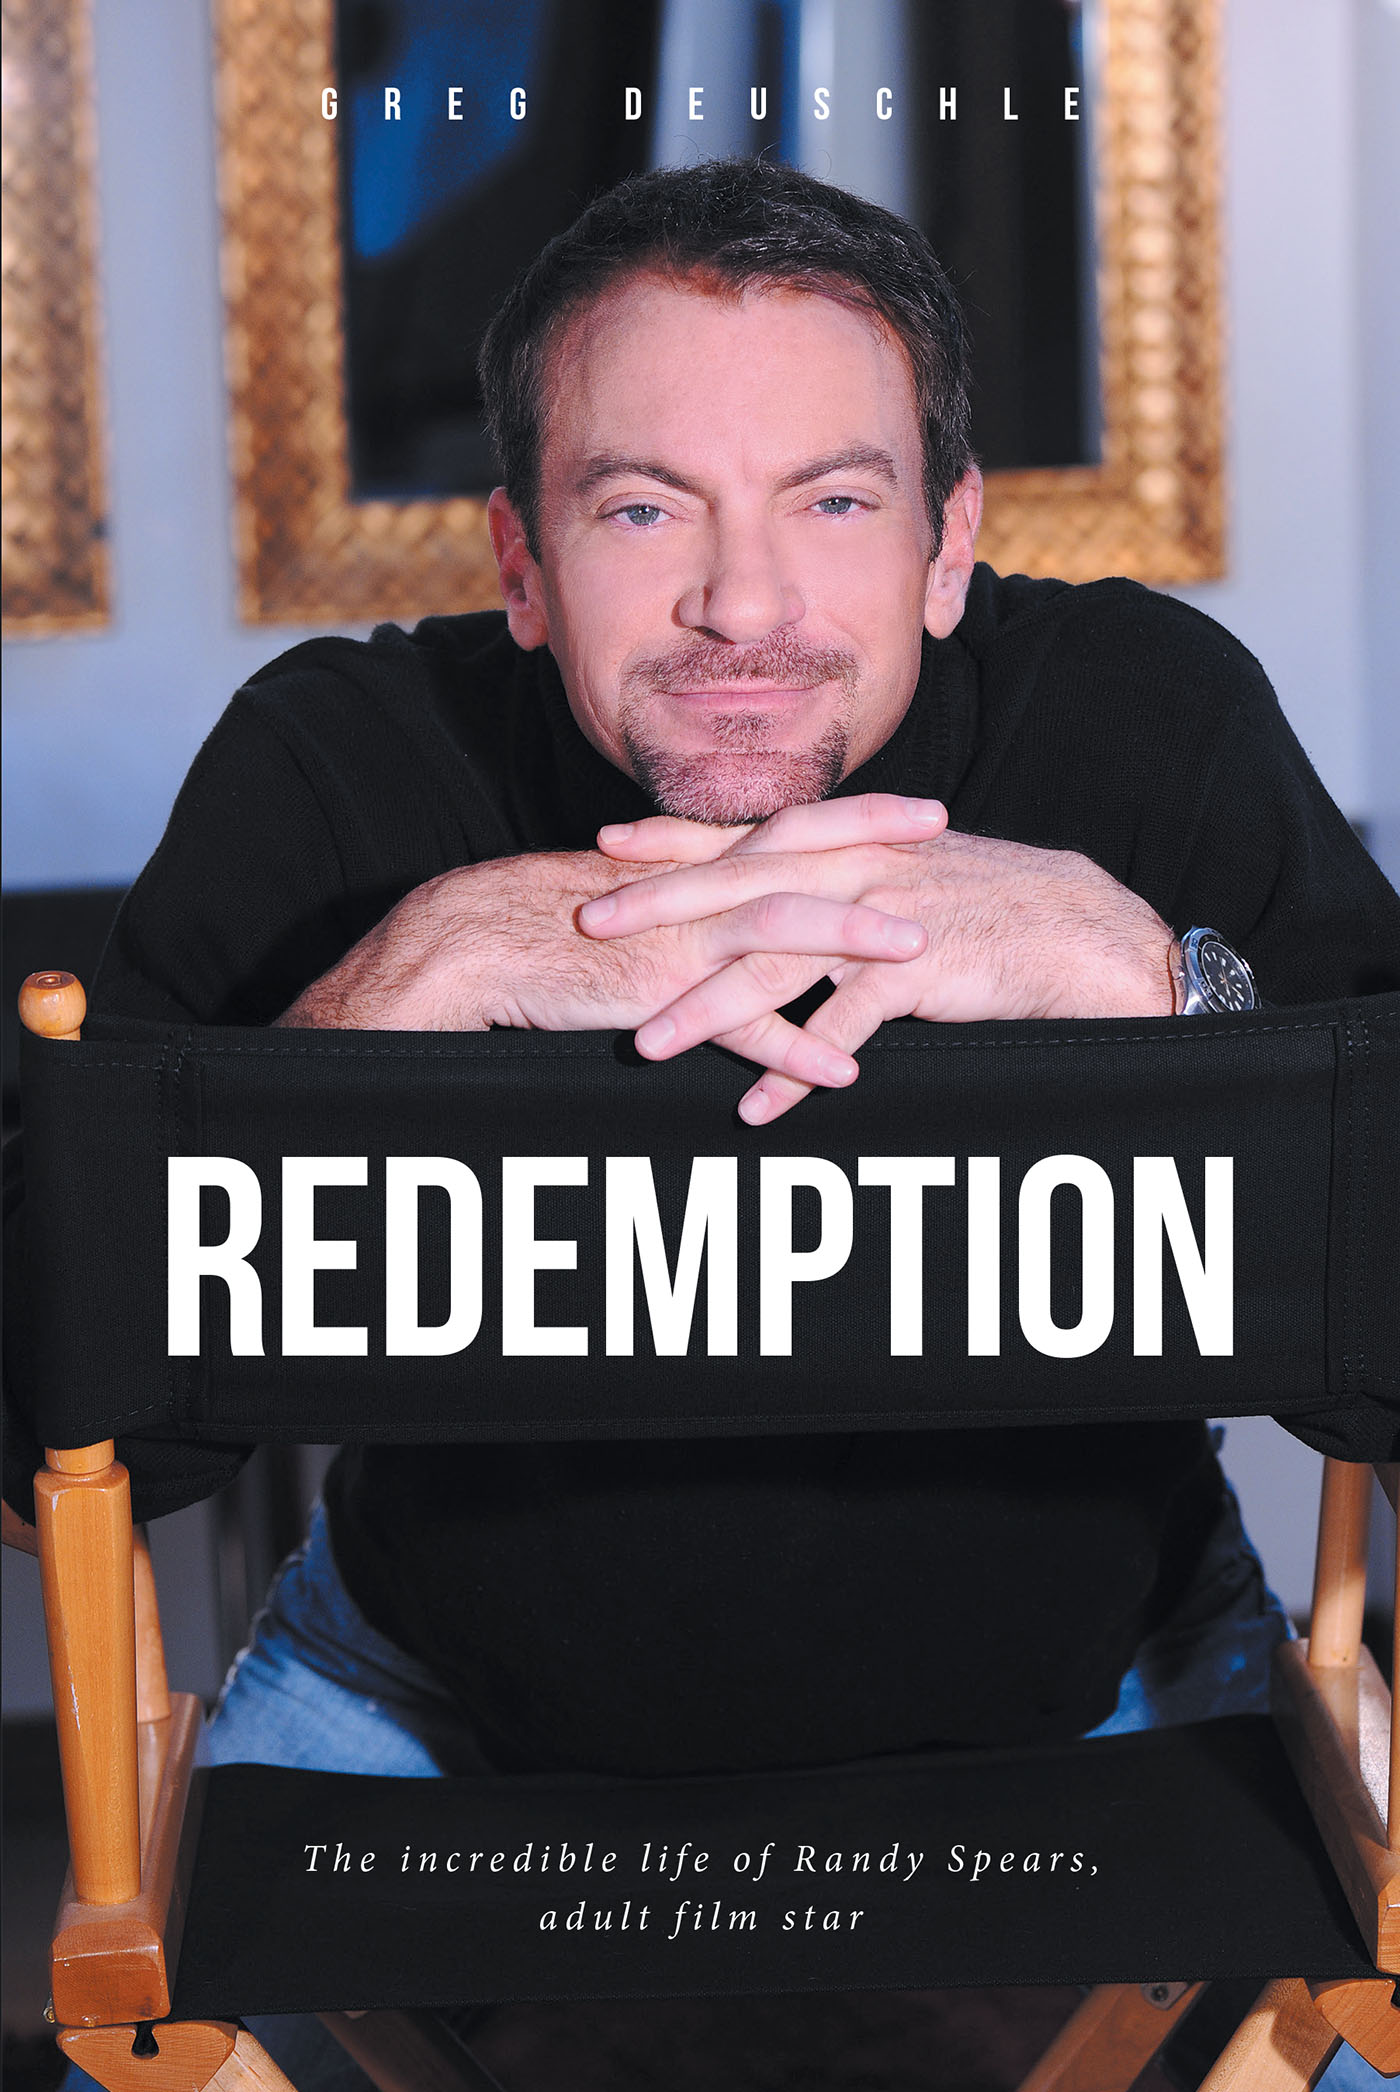 Greg Deuschle’s New Book, "Redemption," is an Eye-Opening Tale of the Author's Experiences, Including His Time as an Adult Entertainment Star and His Turn Towards Christ